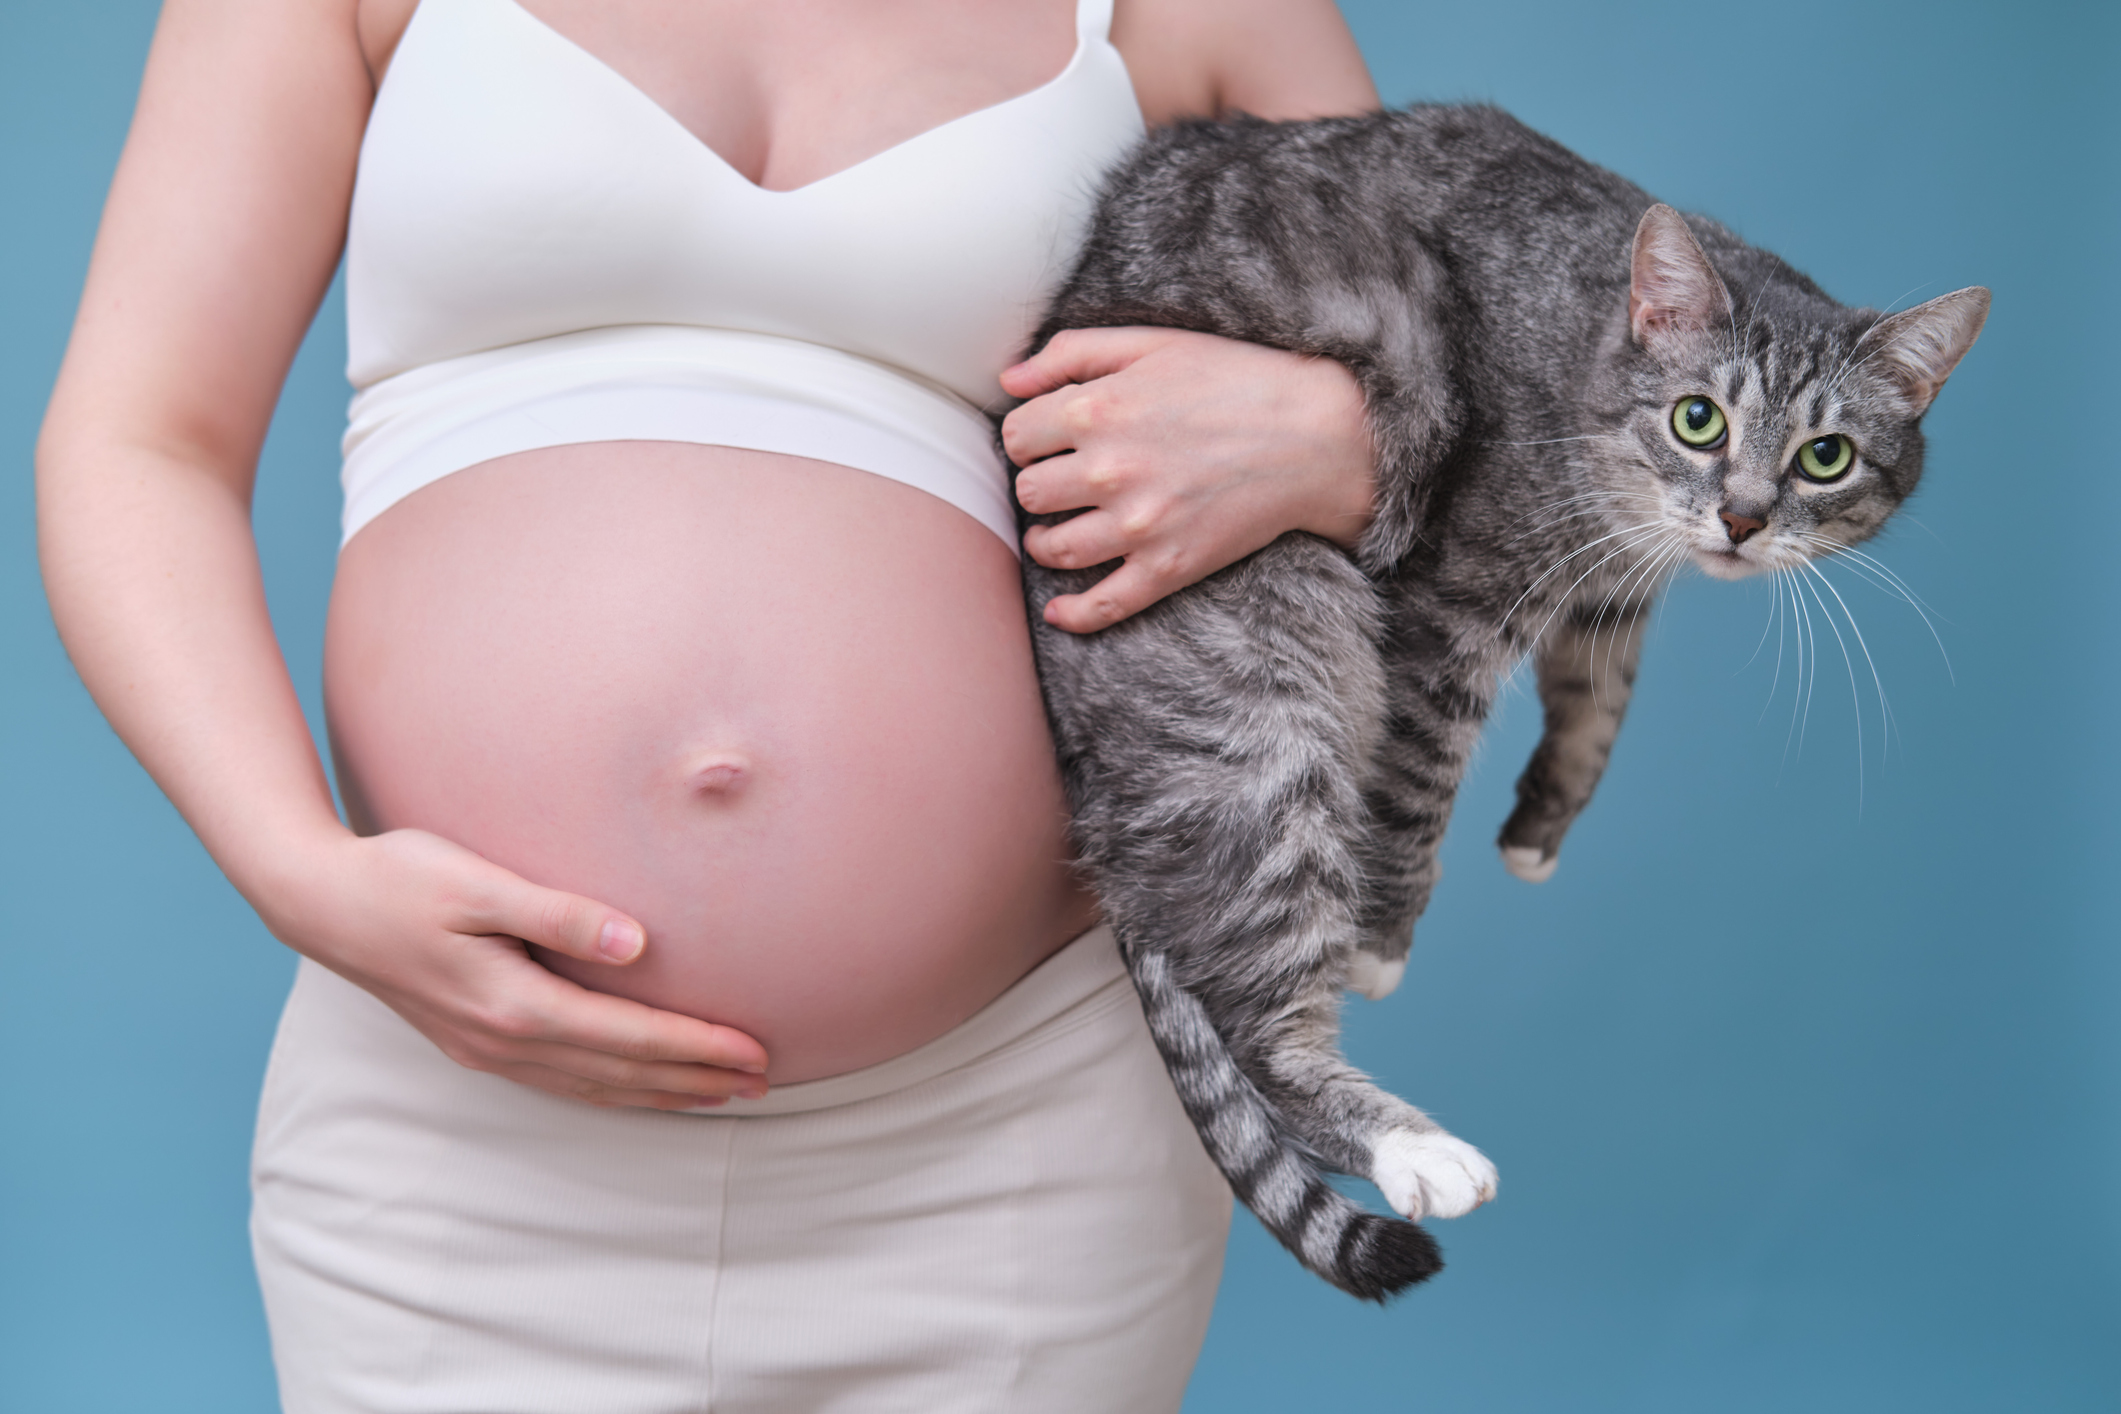 Pregnant woman holding a cat